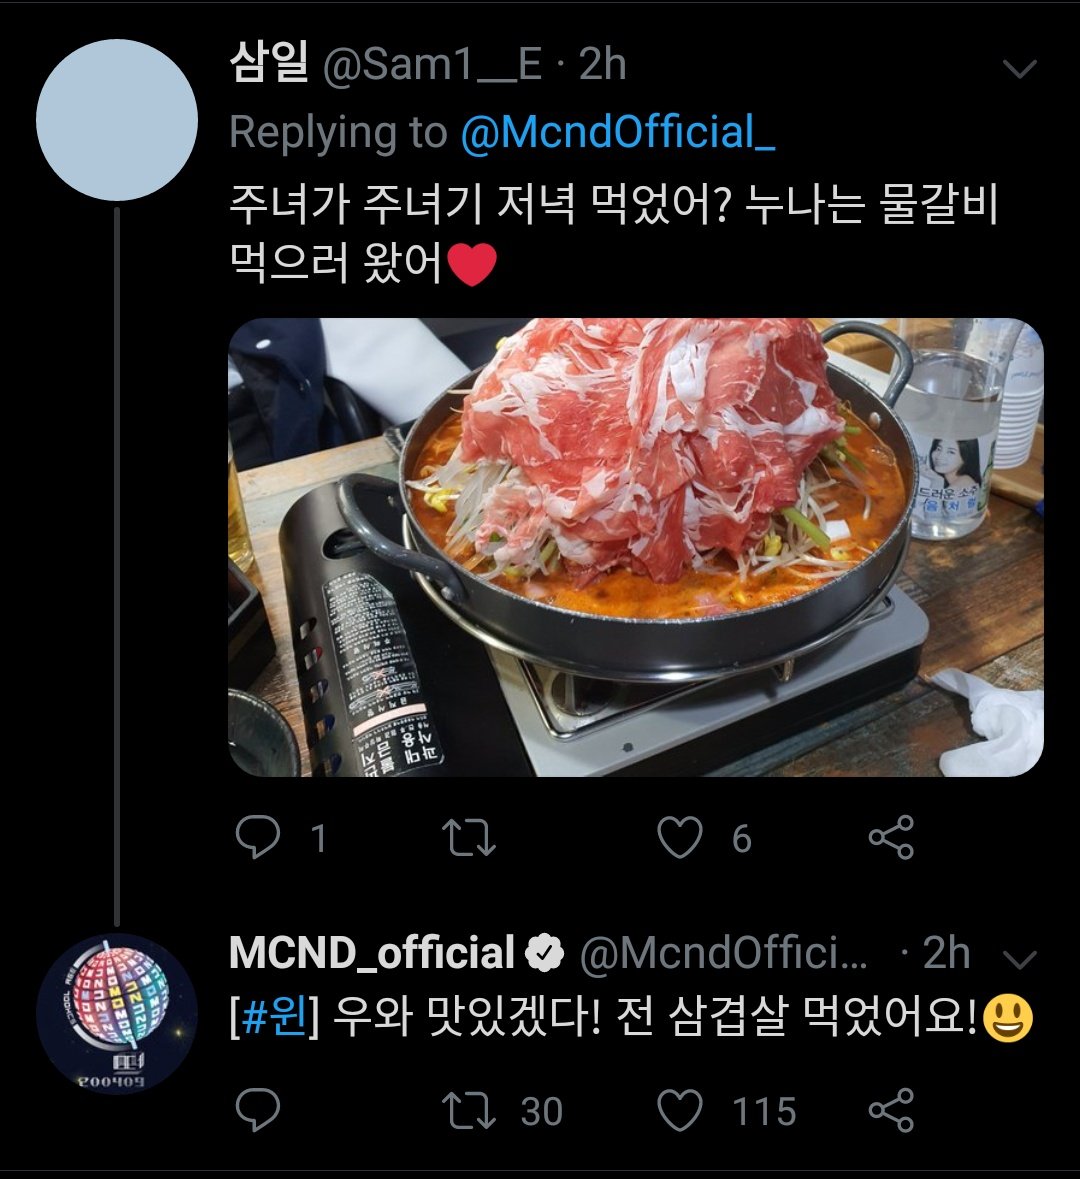 : Junhyuk-ah Junhyuk-ah have you had your dinner? Noona came to eat 물갈비 (some ribs idk how trans) : Wow looks delicious!! I ate pork belly!! 